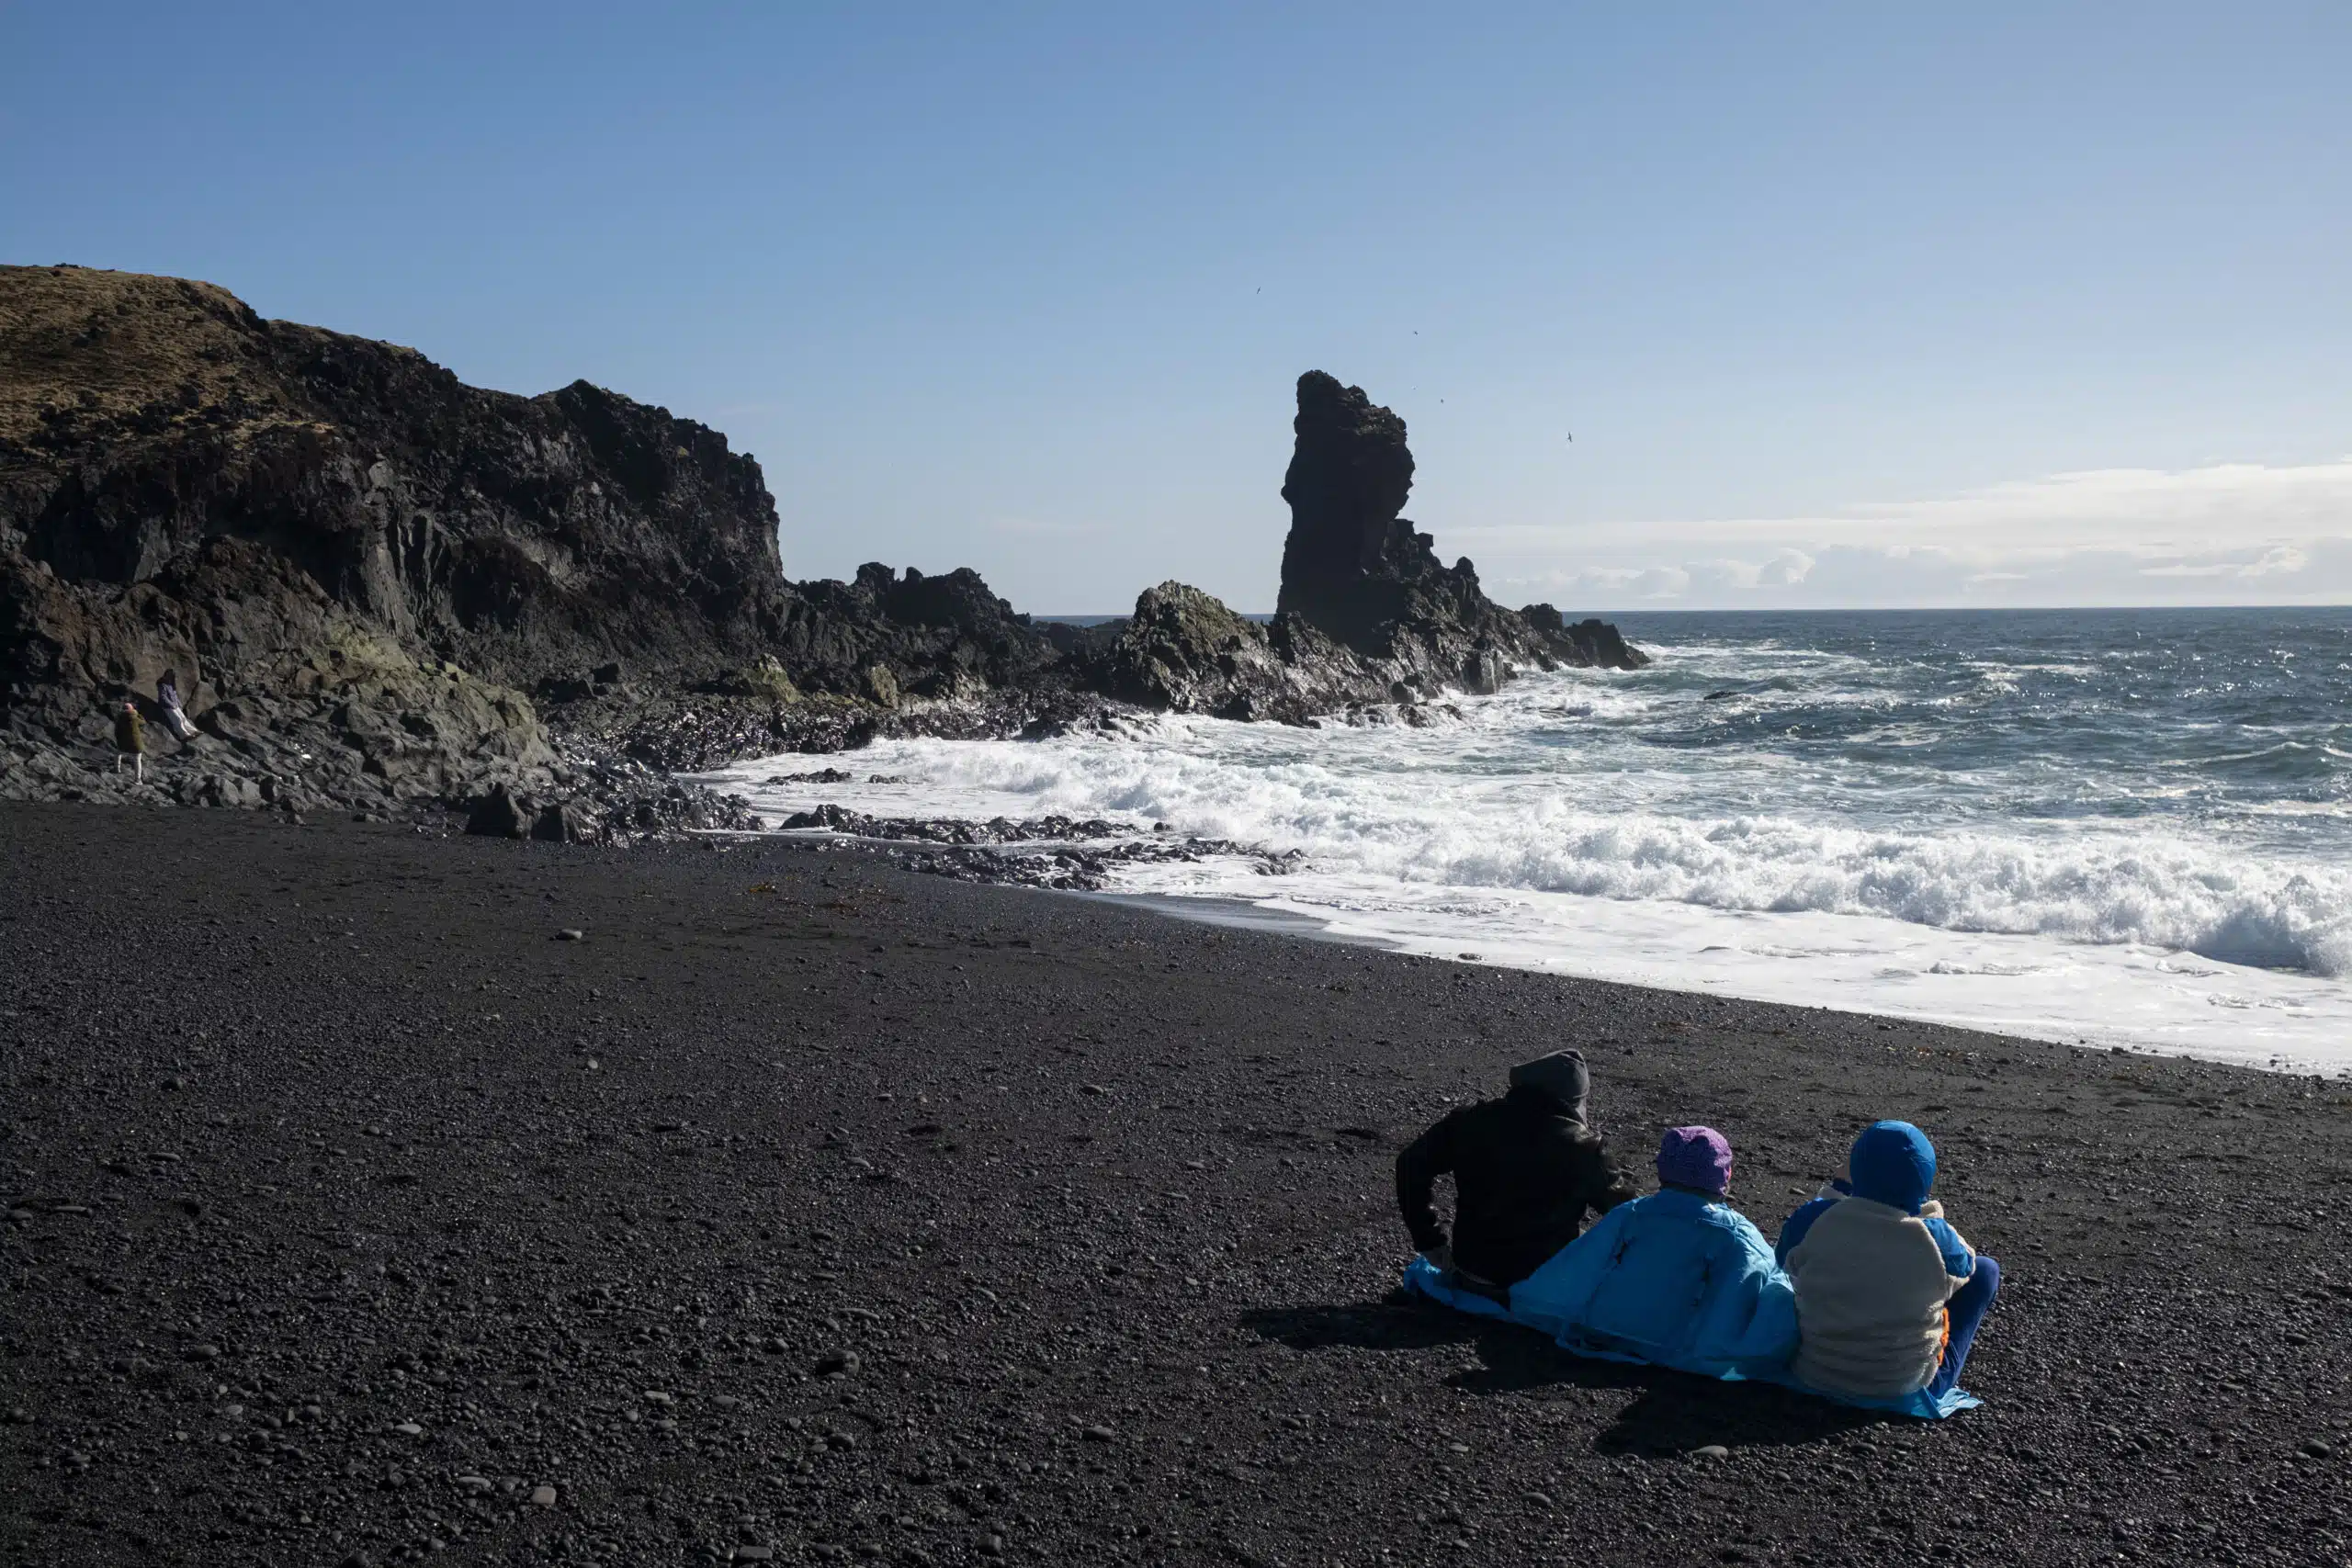 If you could only visit one black sand beach which one would you choose?